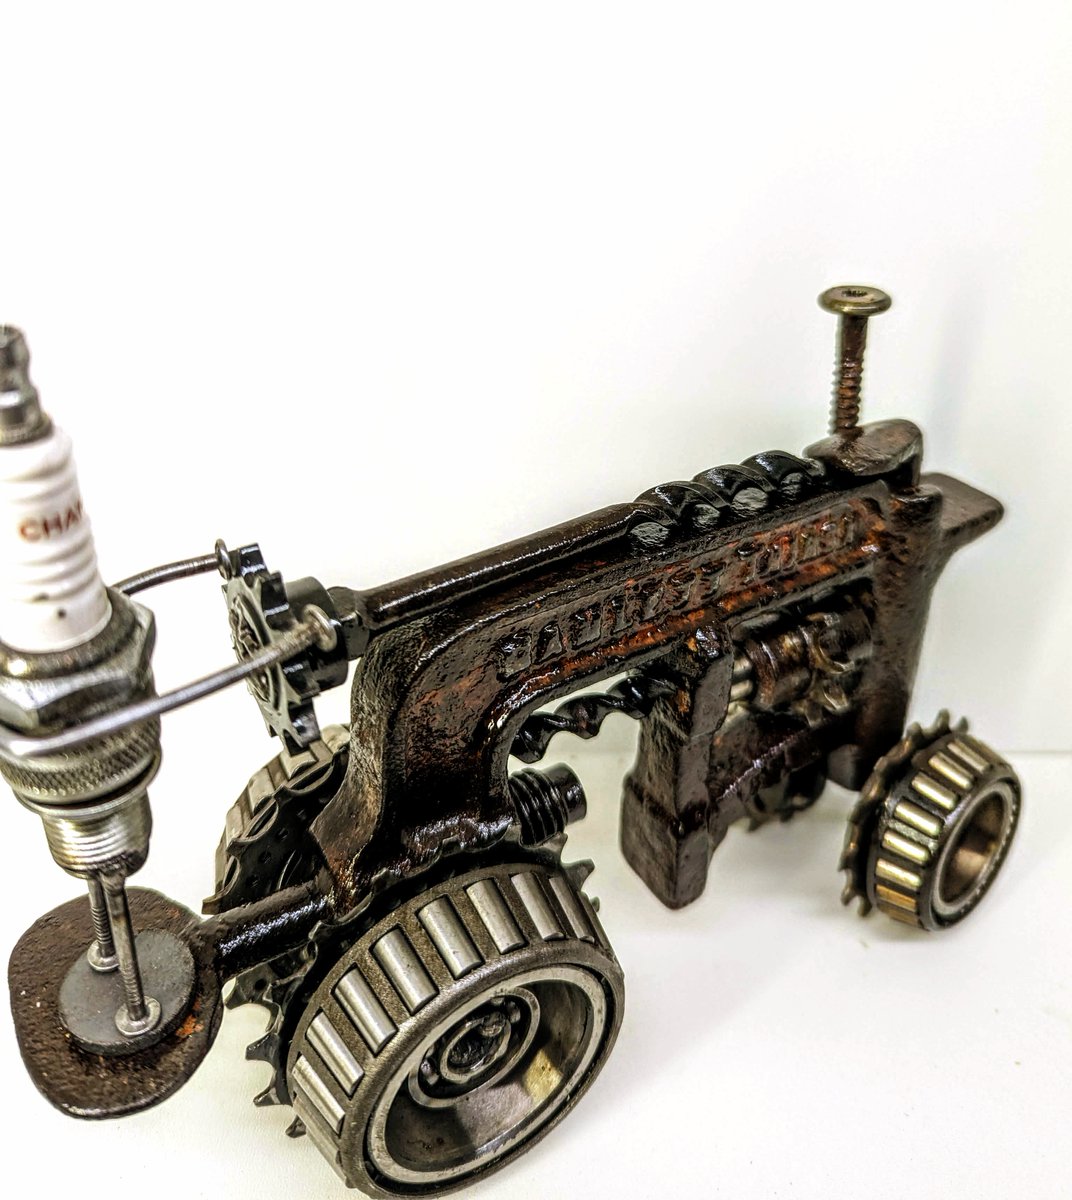 Here's a cool one for all you tractor lovers out there, this is an old school tractor made from an old vintage clamp. #earlybiz #vintage #tractor #machinery #handmade #SmallBiz #recycled #repurposed